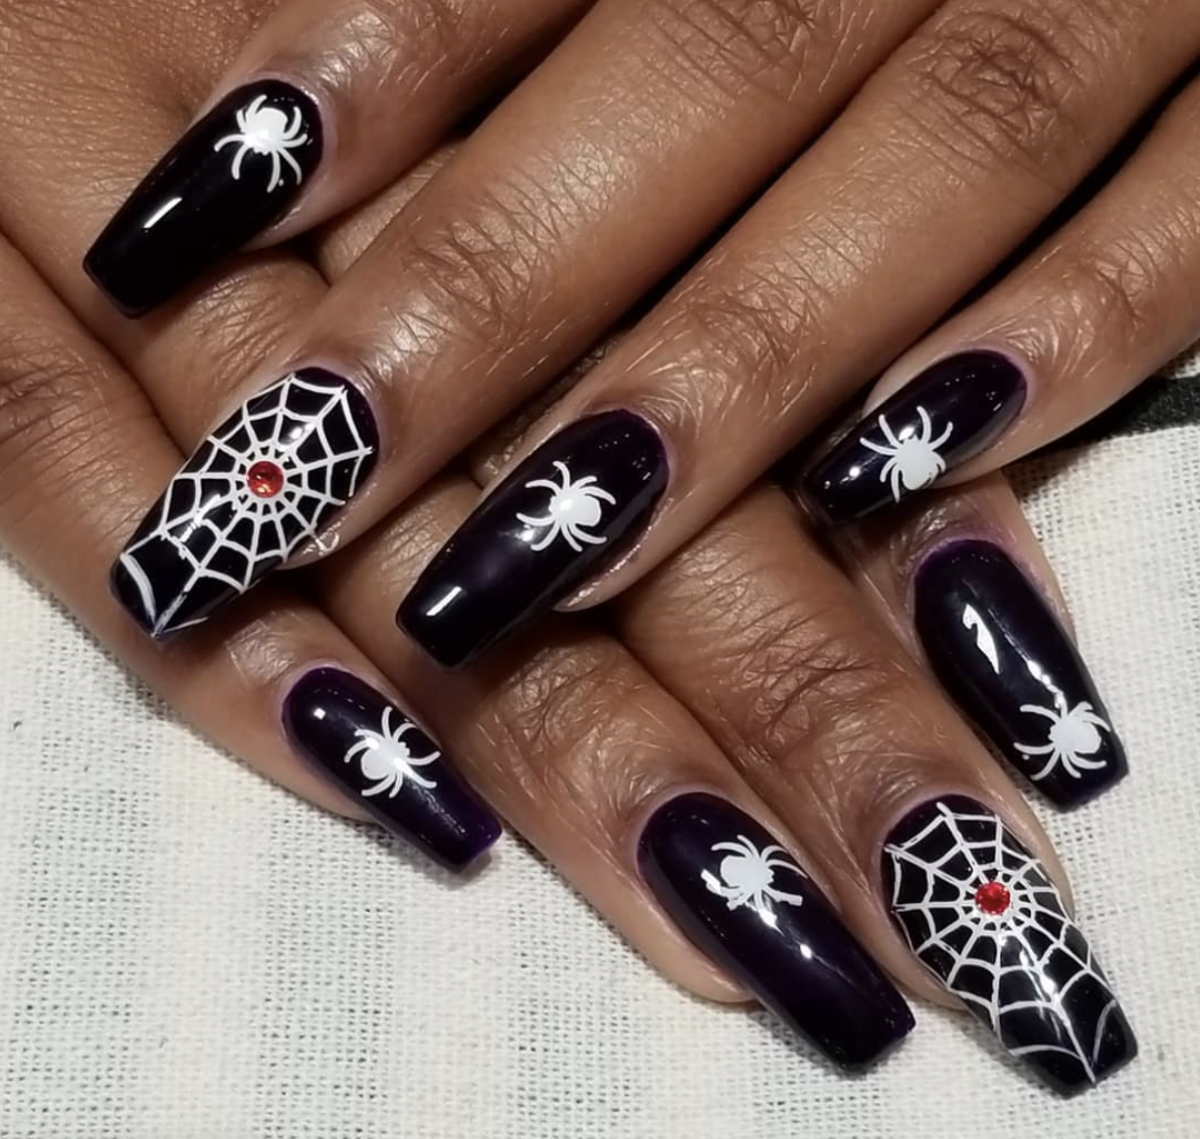 Spooky Themed Nails To Get You In The Halloween Spirit - Essence